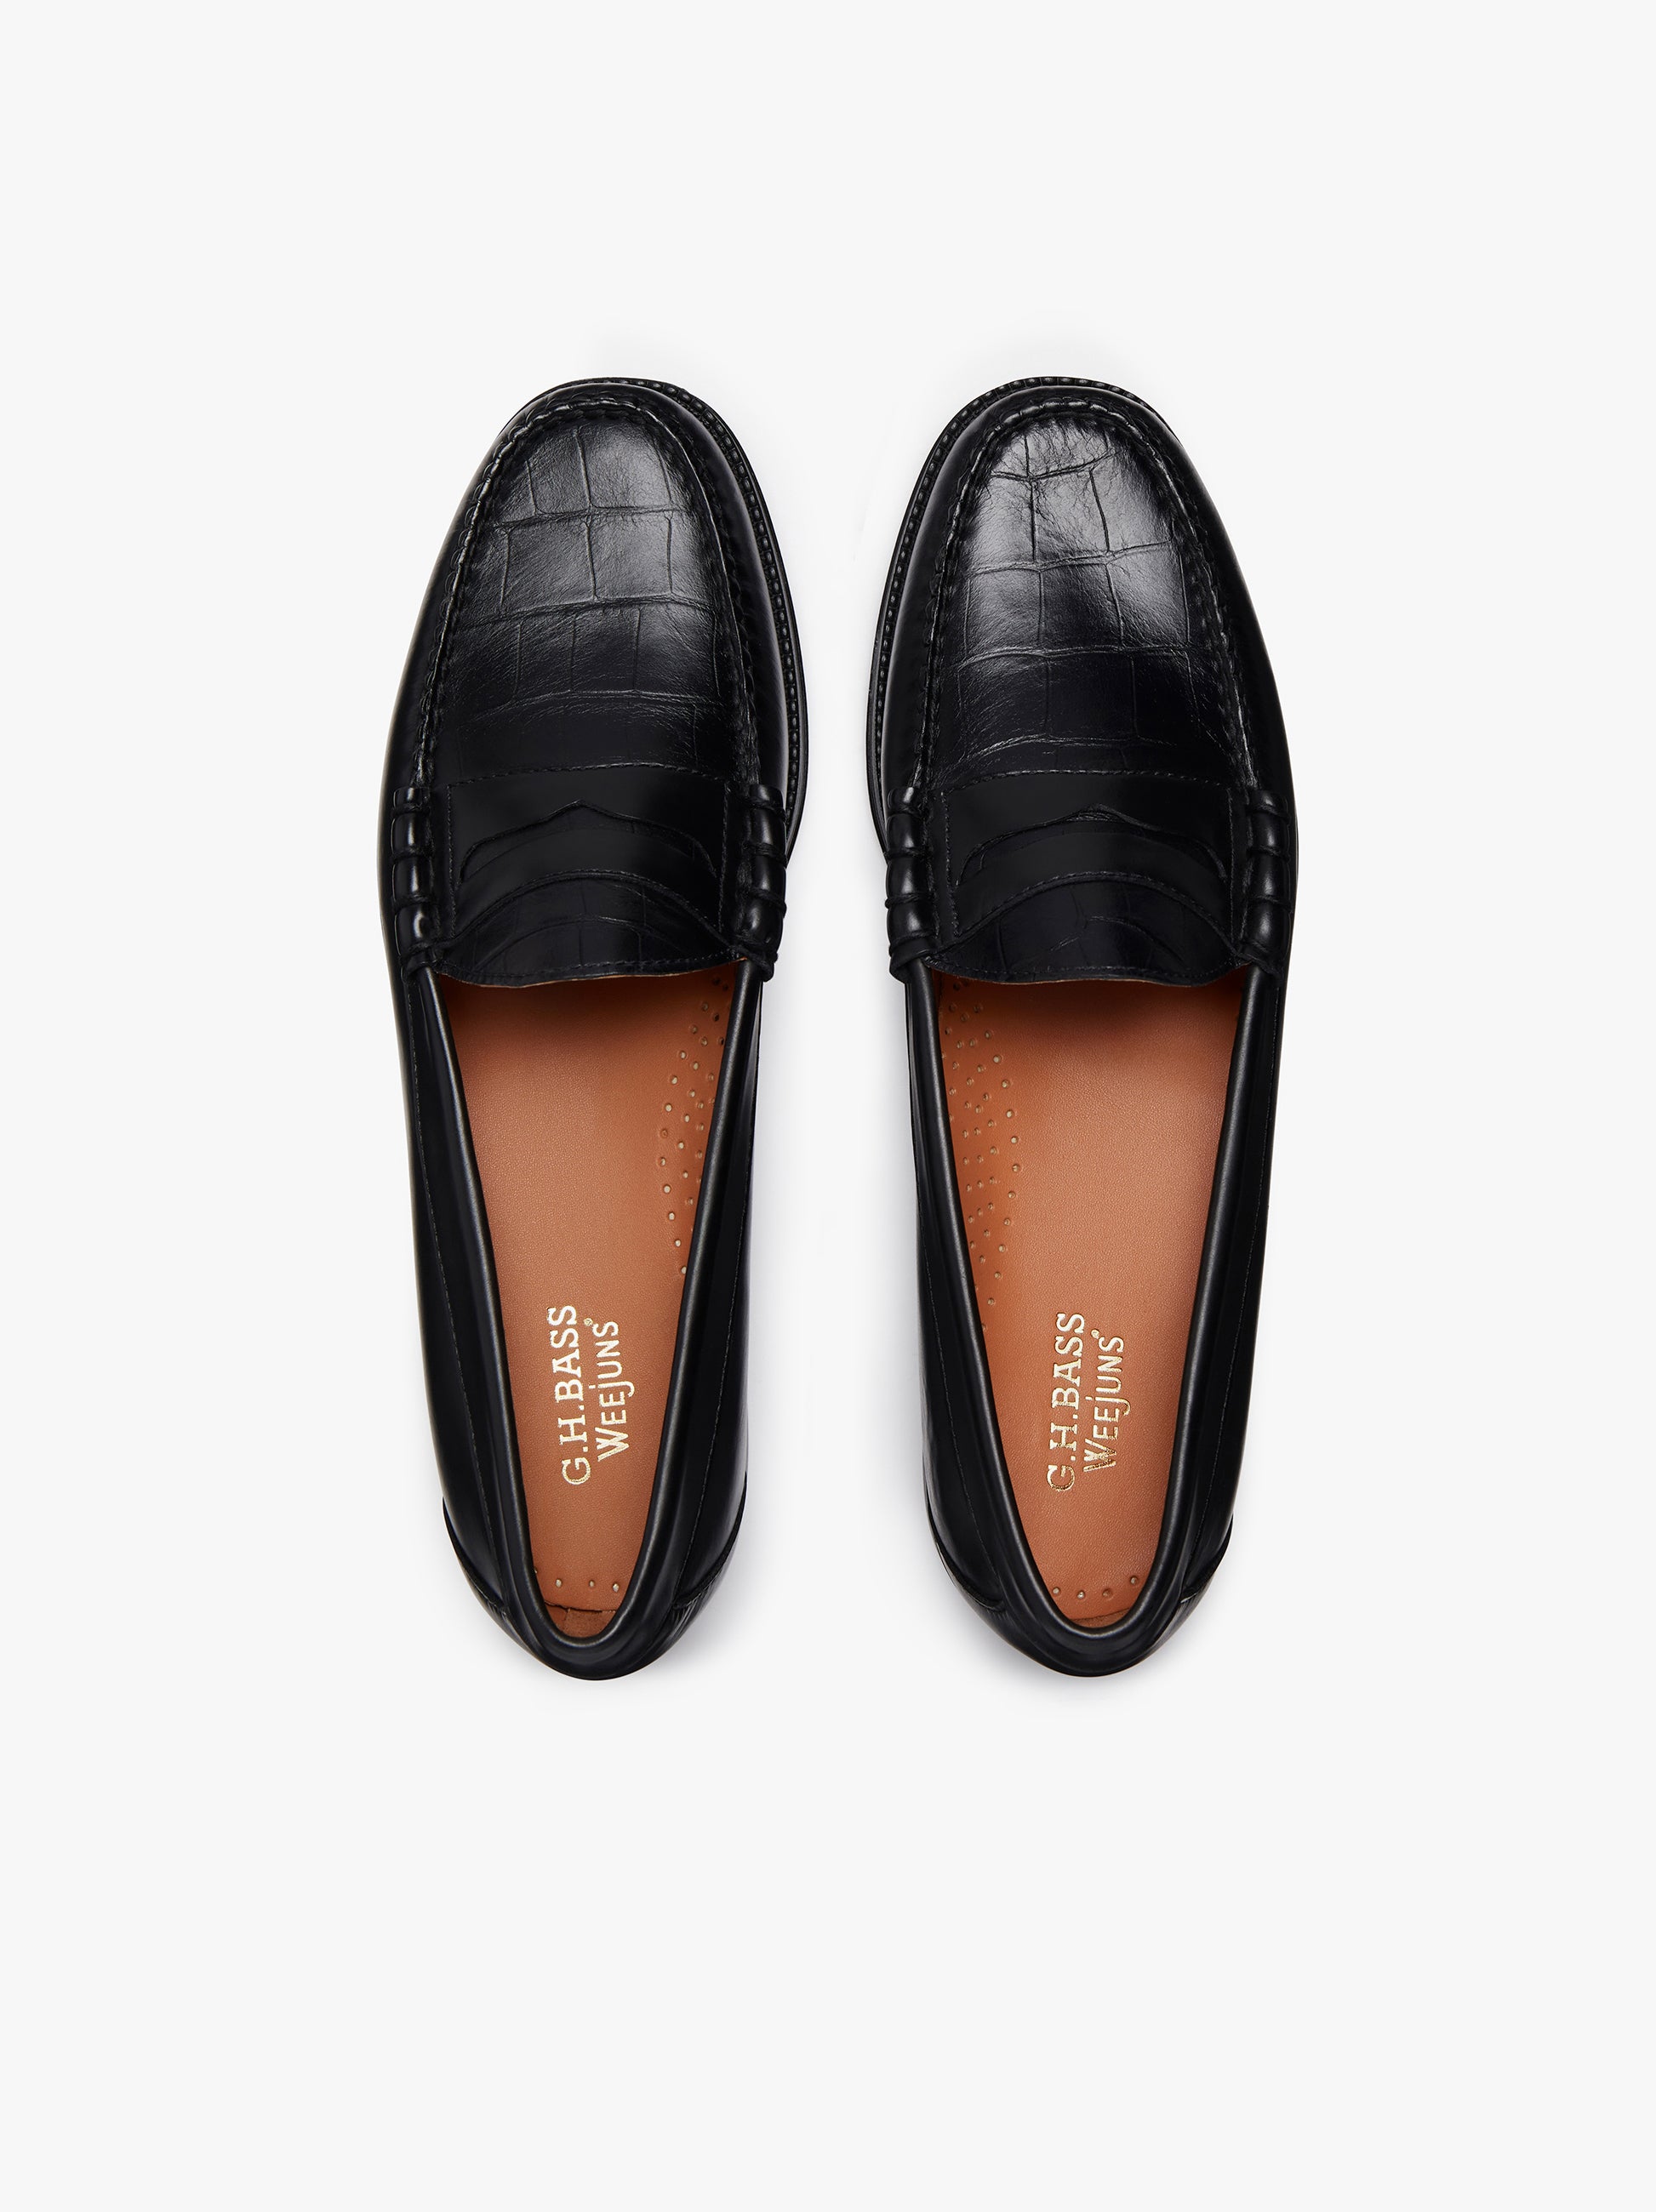 Easy Weejuns Larson Penny Loafers – G.H.BASS 1876